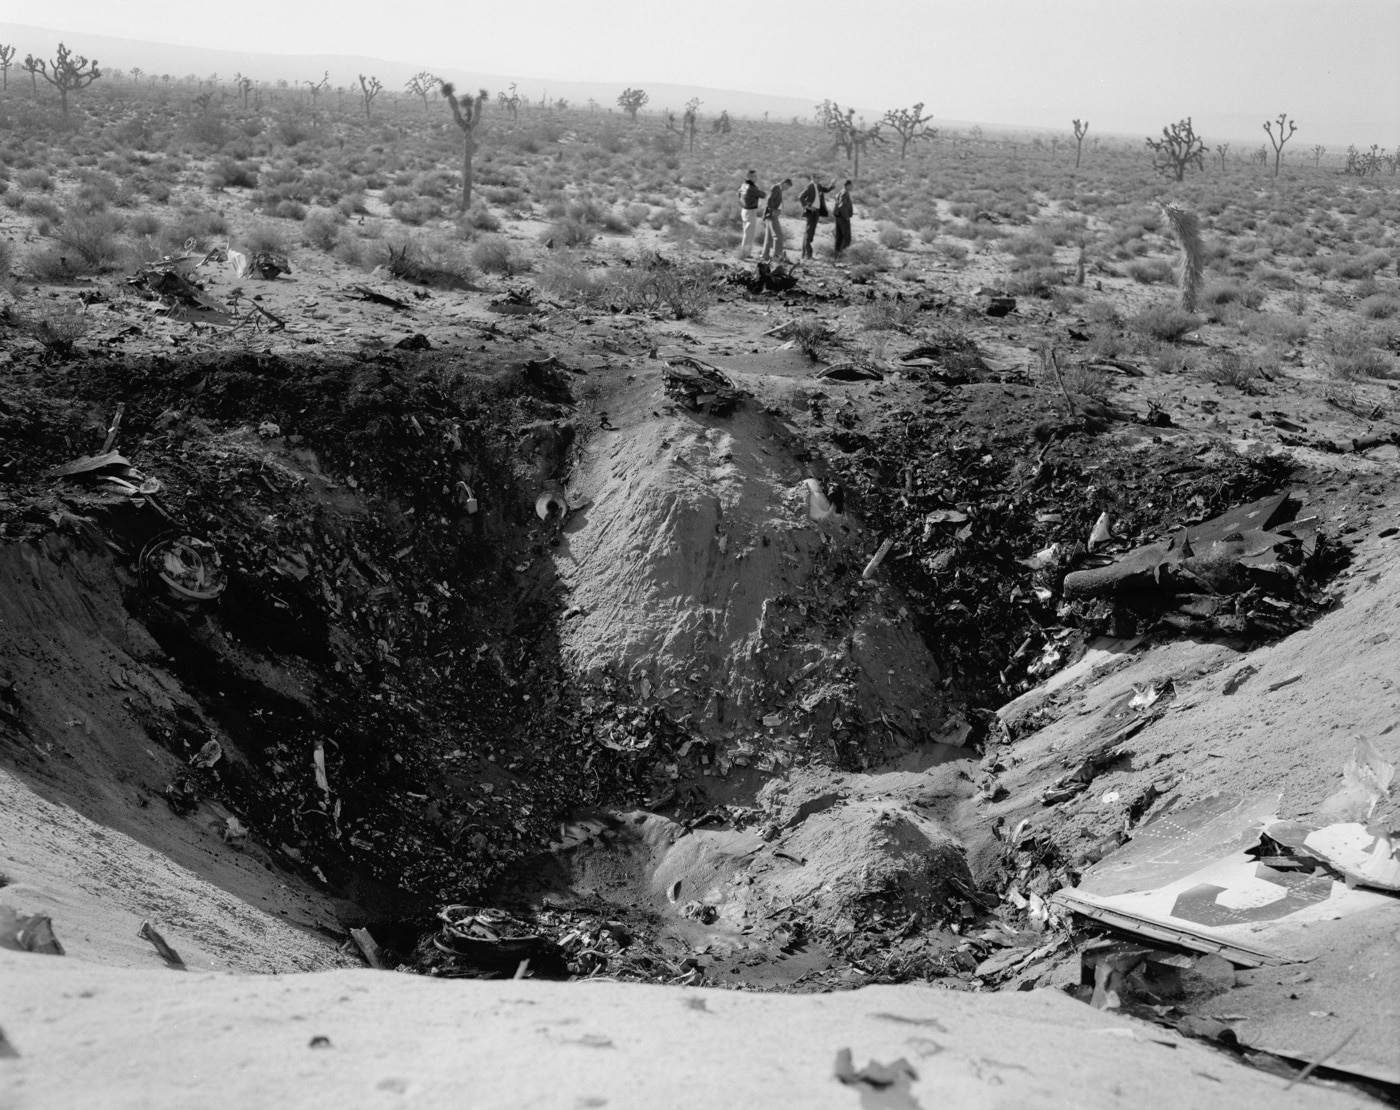 In this B&W photo, we see the site of the nose-first, high-impact JF-104A crash that left this large crater near Edwards AFB in December 1962. NASA test pilot Milton O. Thompson safely ejected prior to impact.